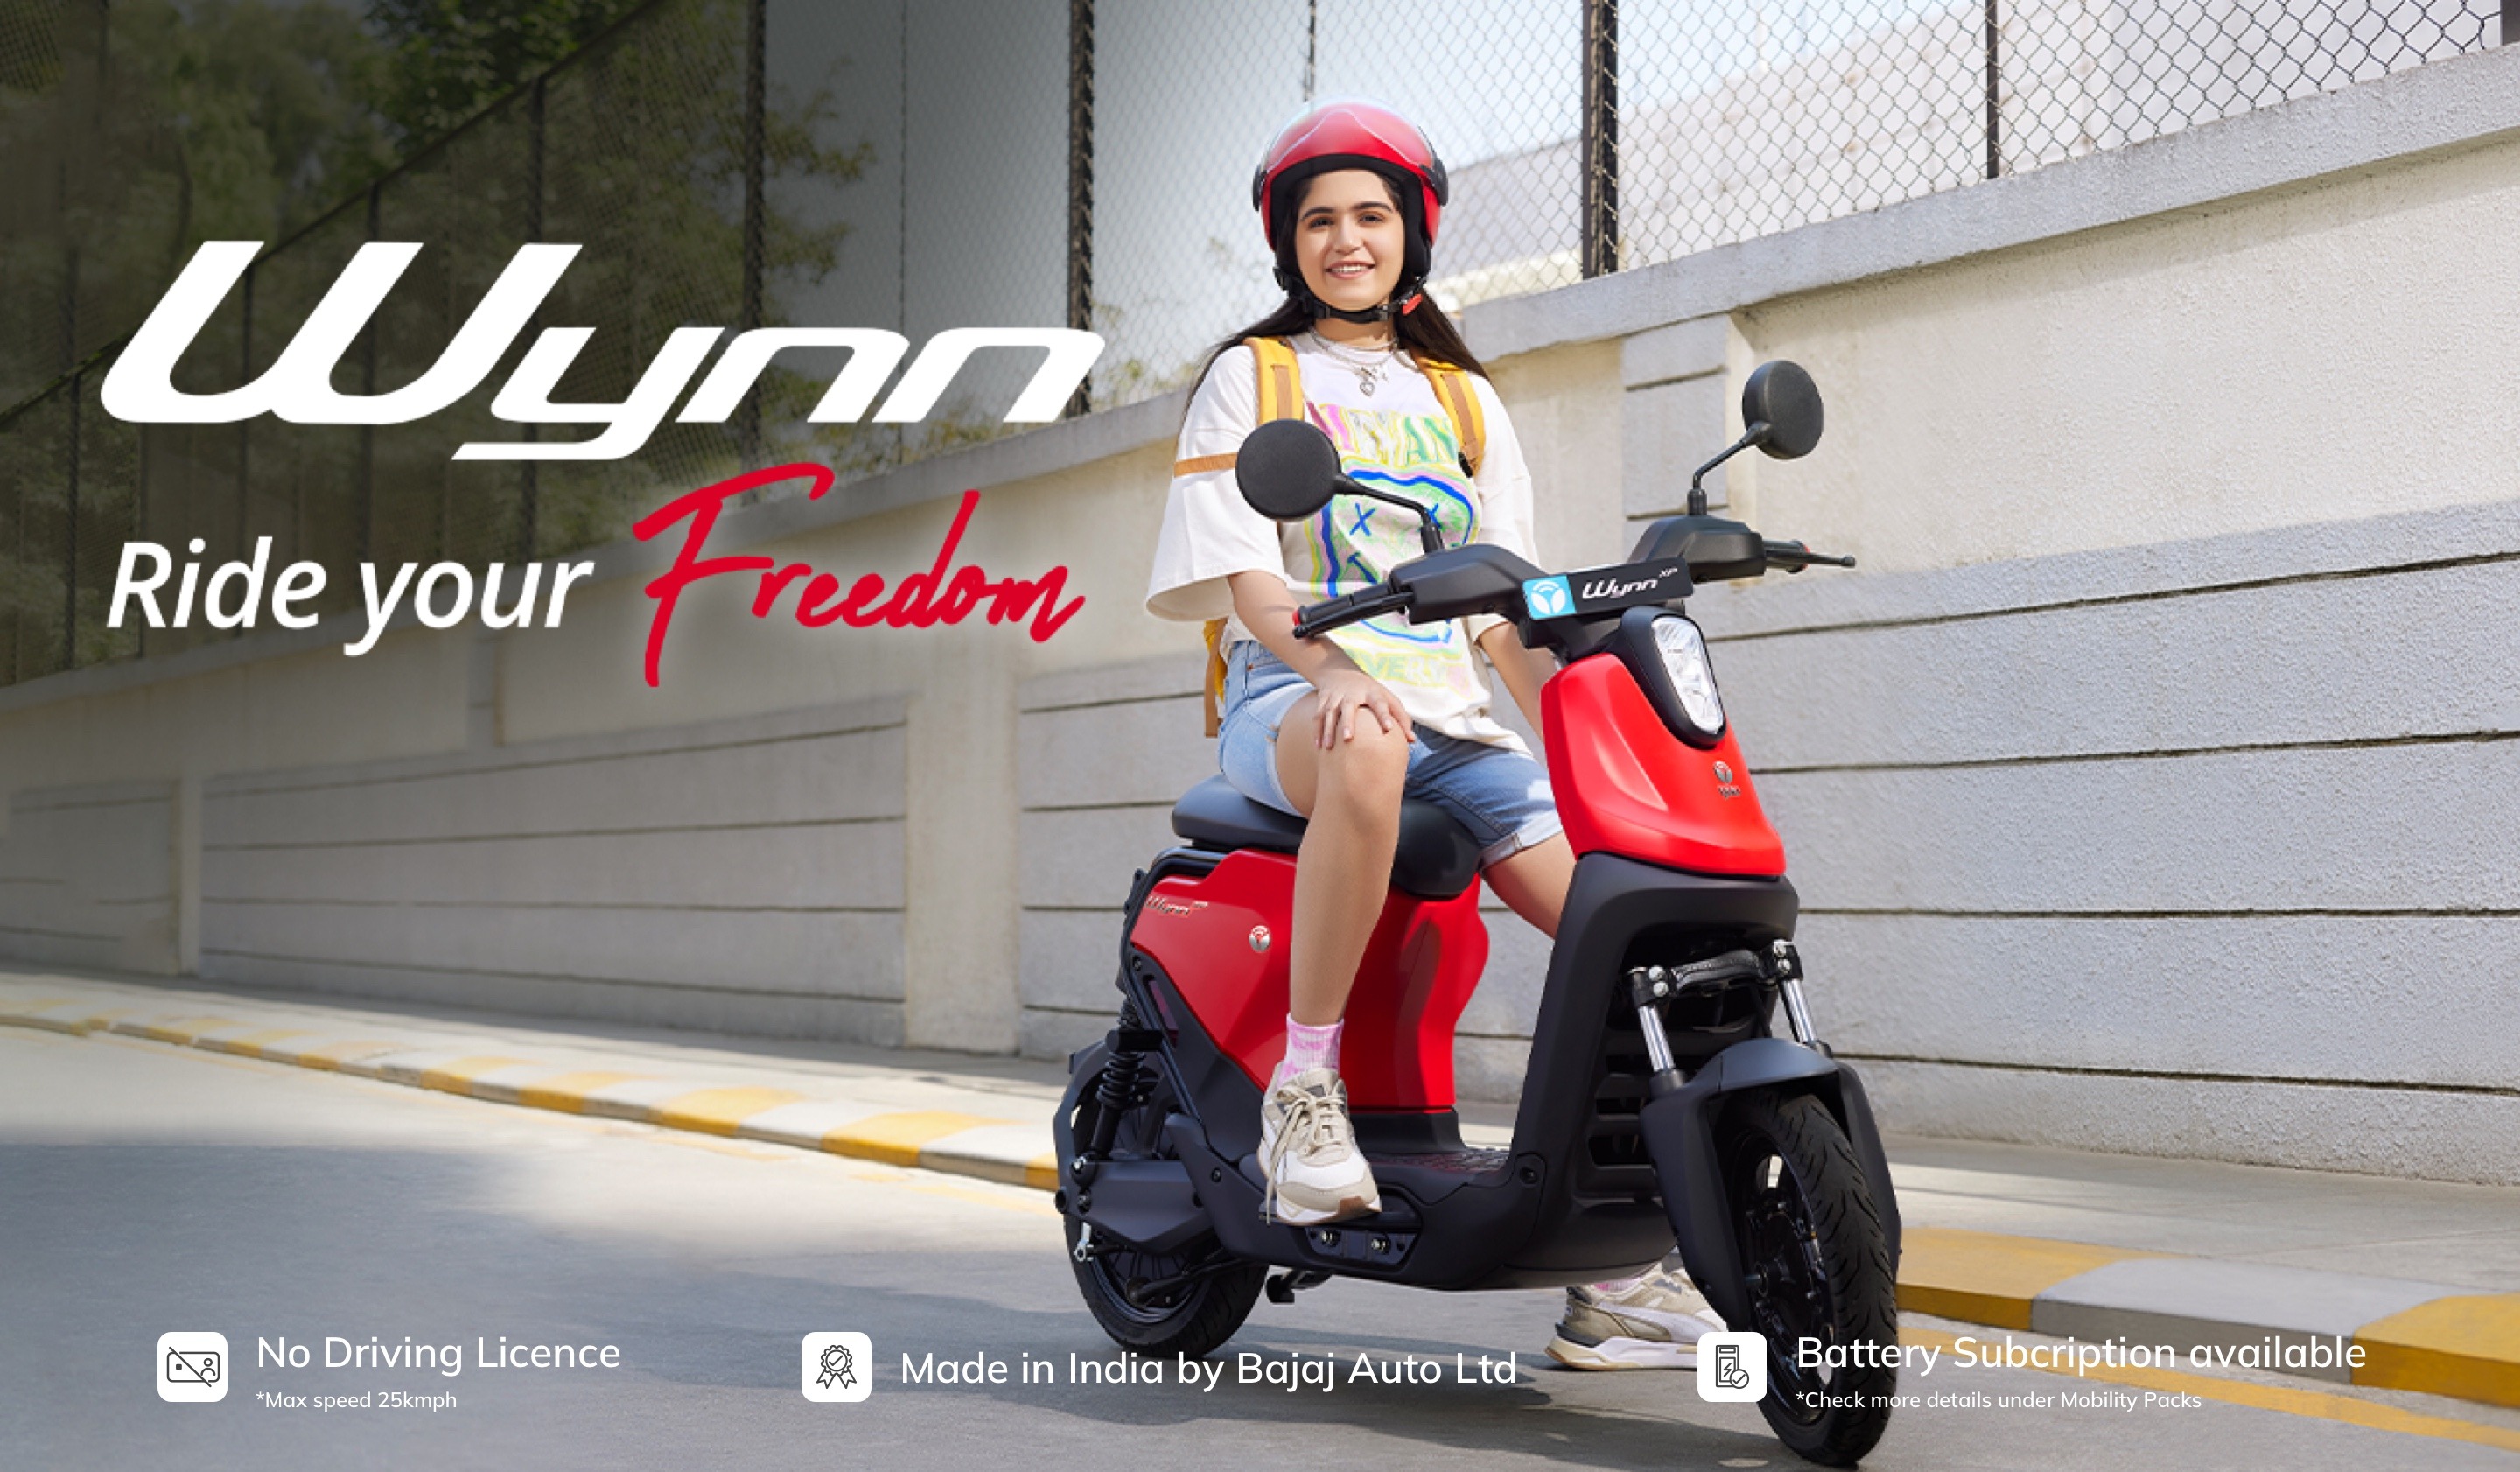 Bajaj YULU Wynn Electric Scooter Launched In India At Rs 55,555 - portrait